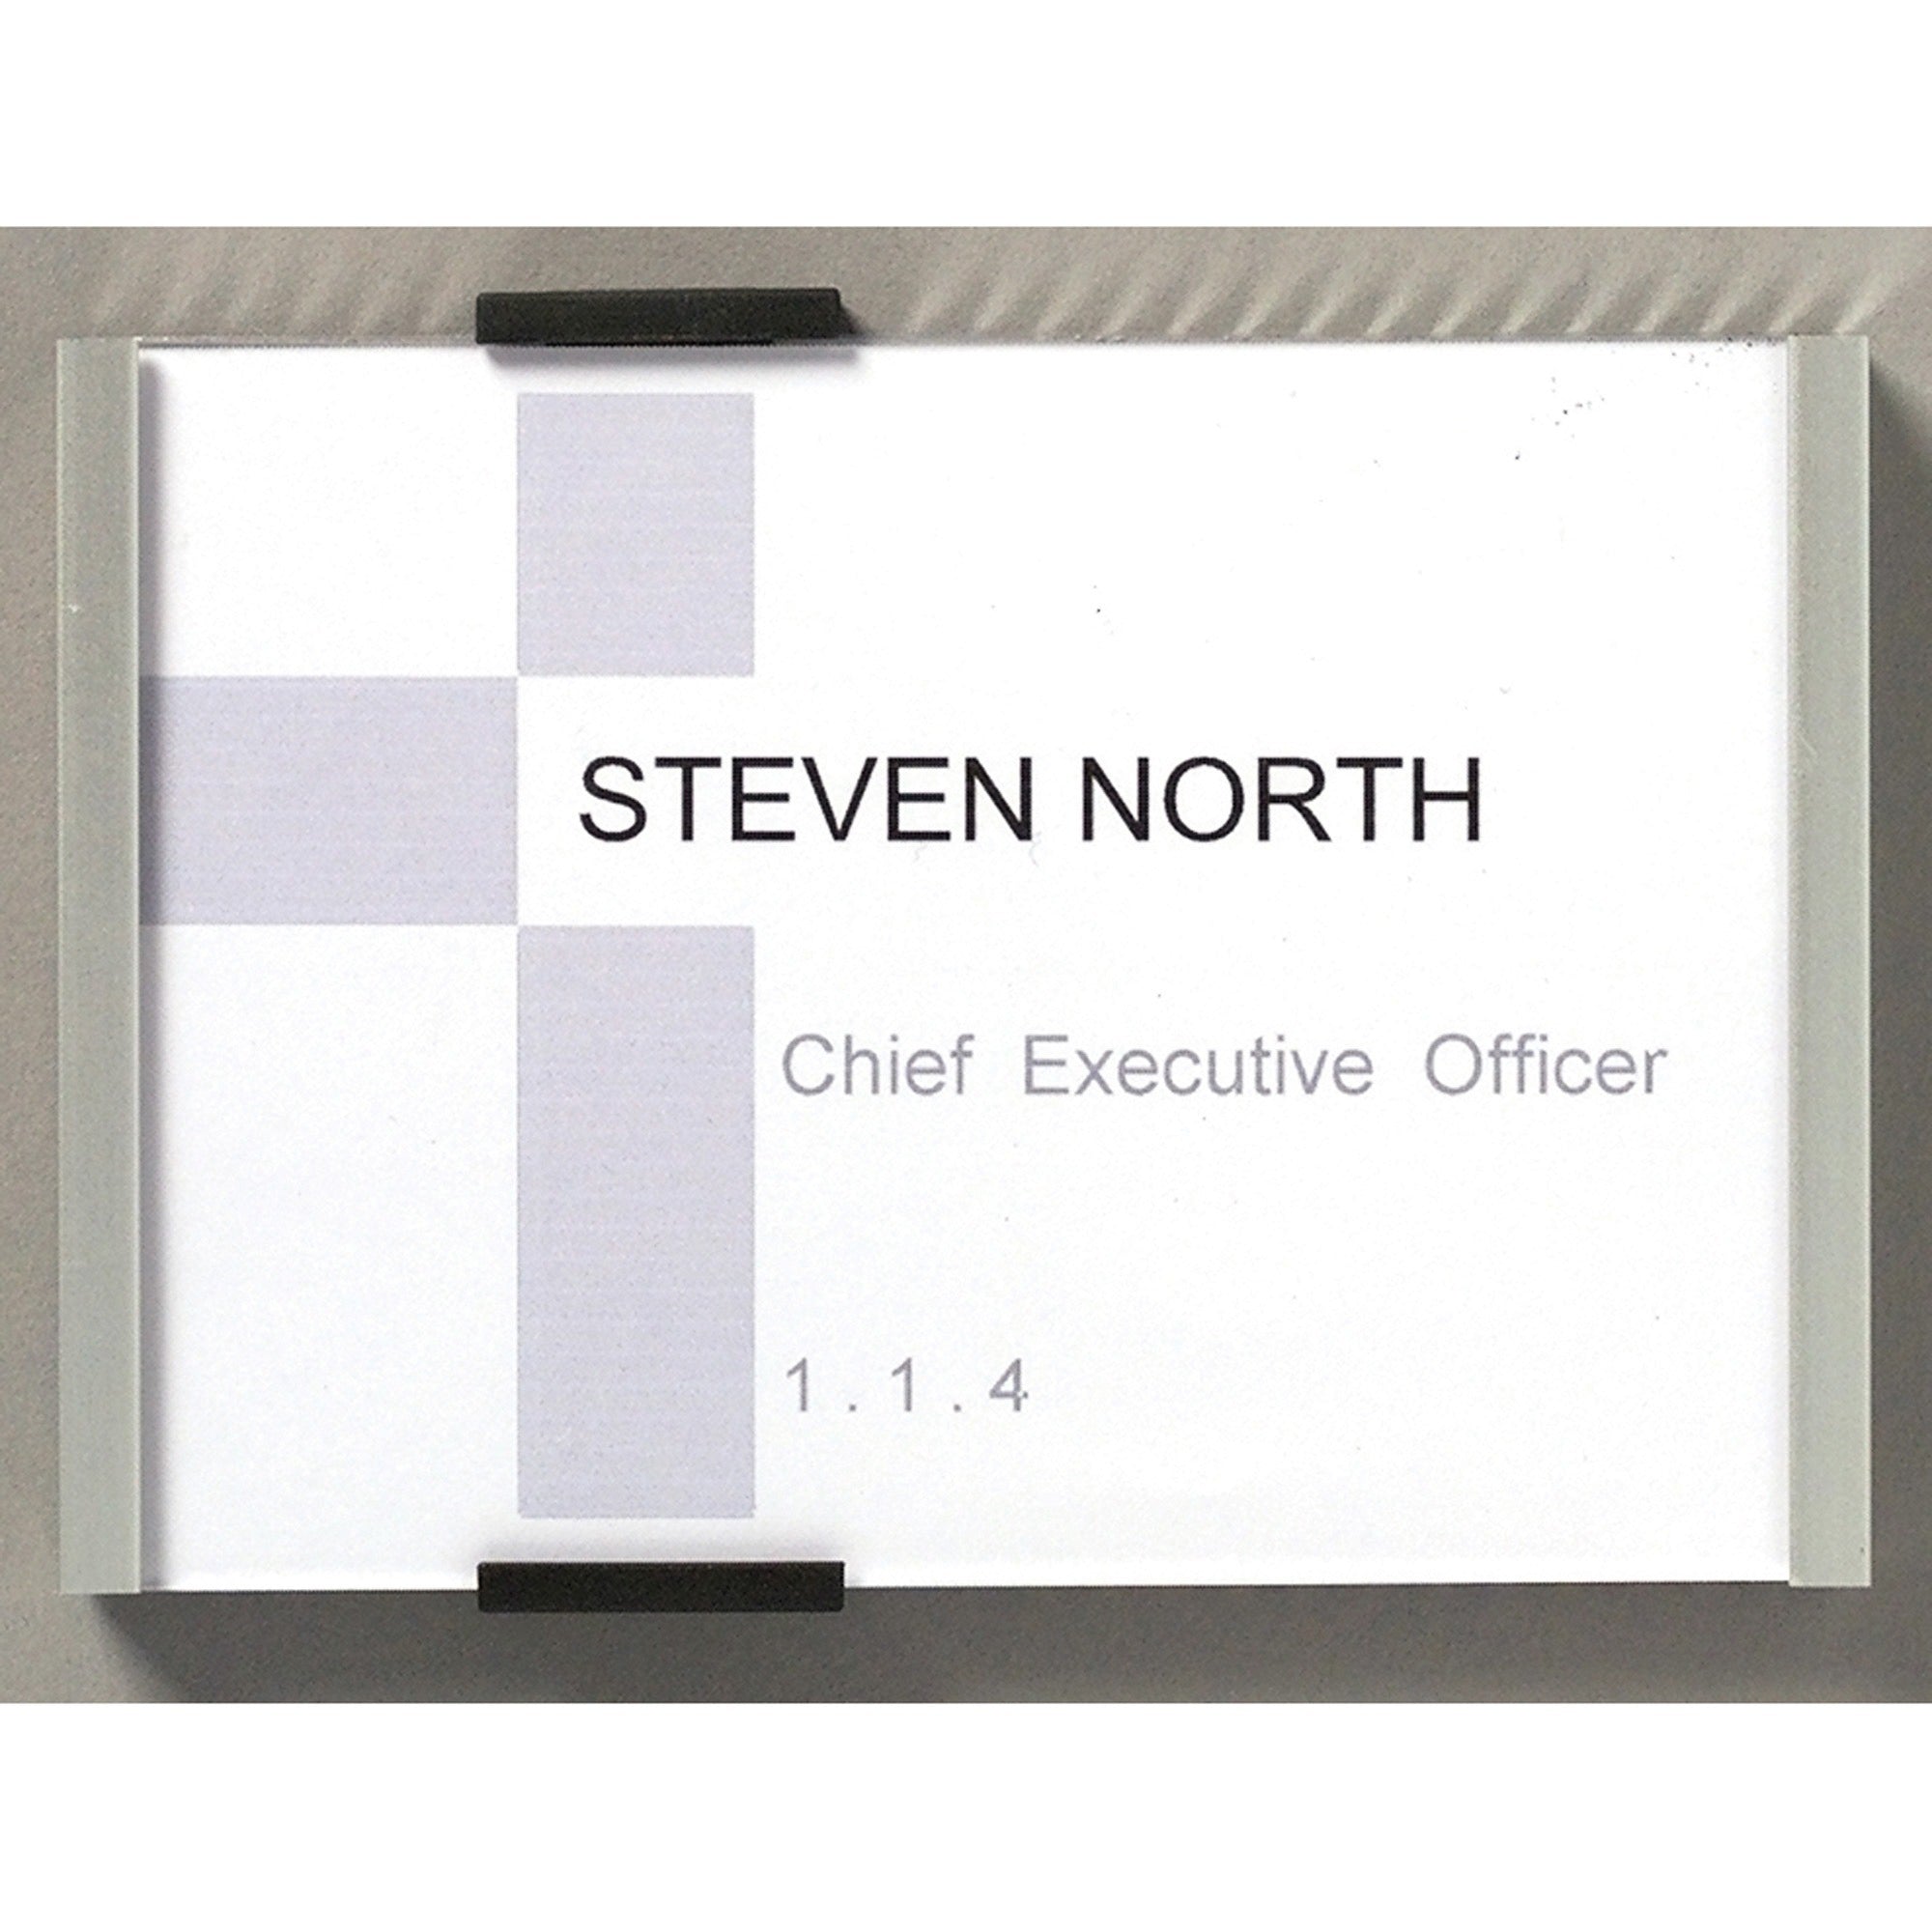 durable-wall-mounted-info-sign-6-1-8-x-4-3-8-rectangular-shape-acrylic-aluminum-easy-to-update-silver-1-pack_dbl480123 - 2